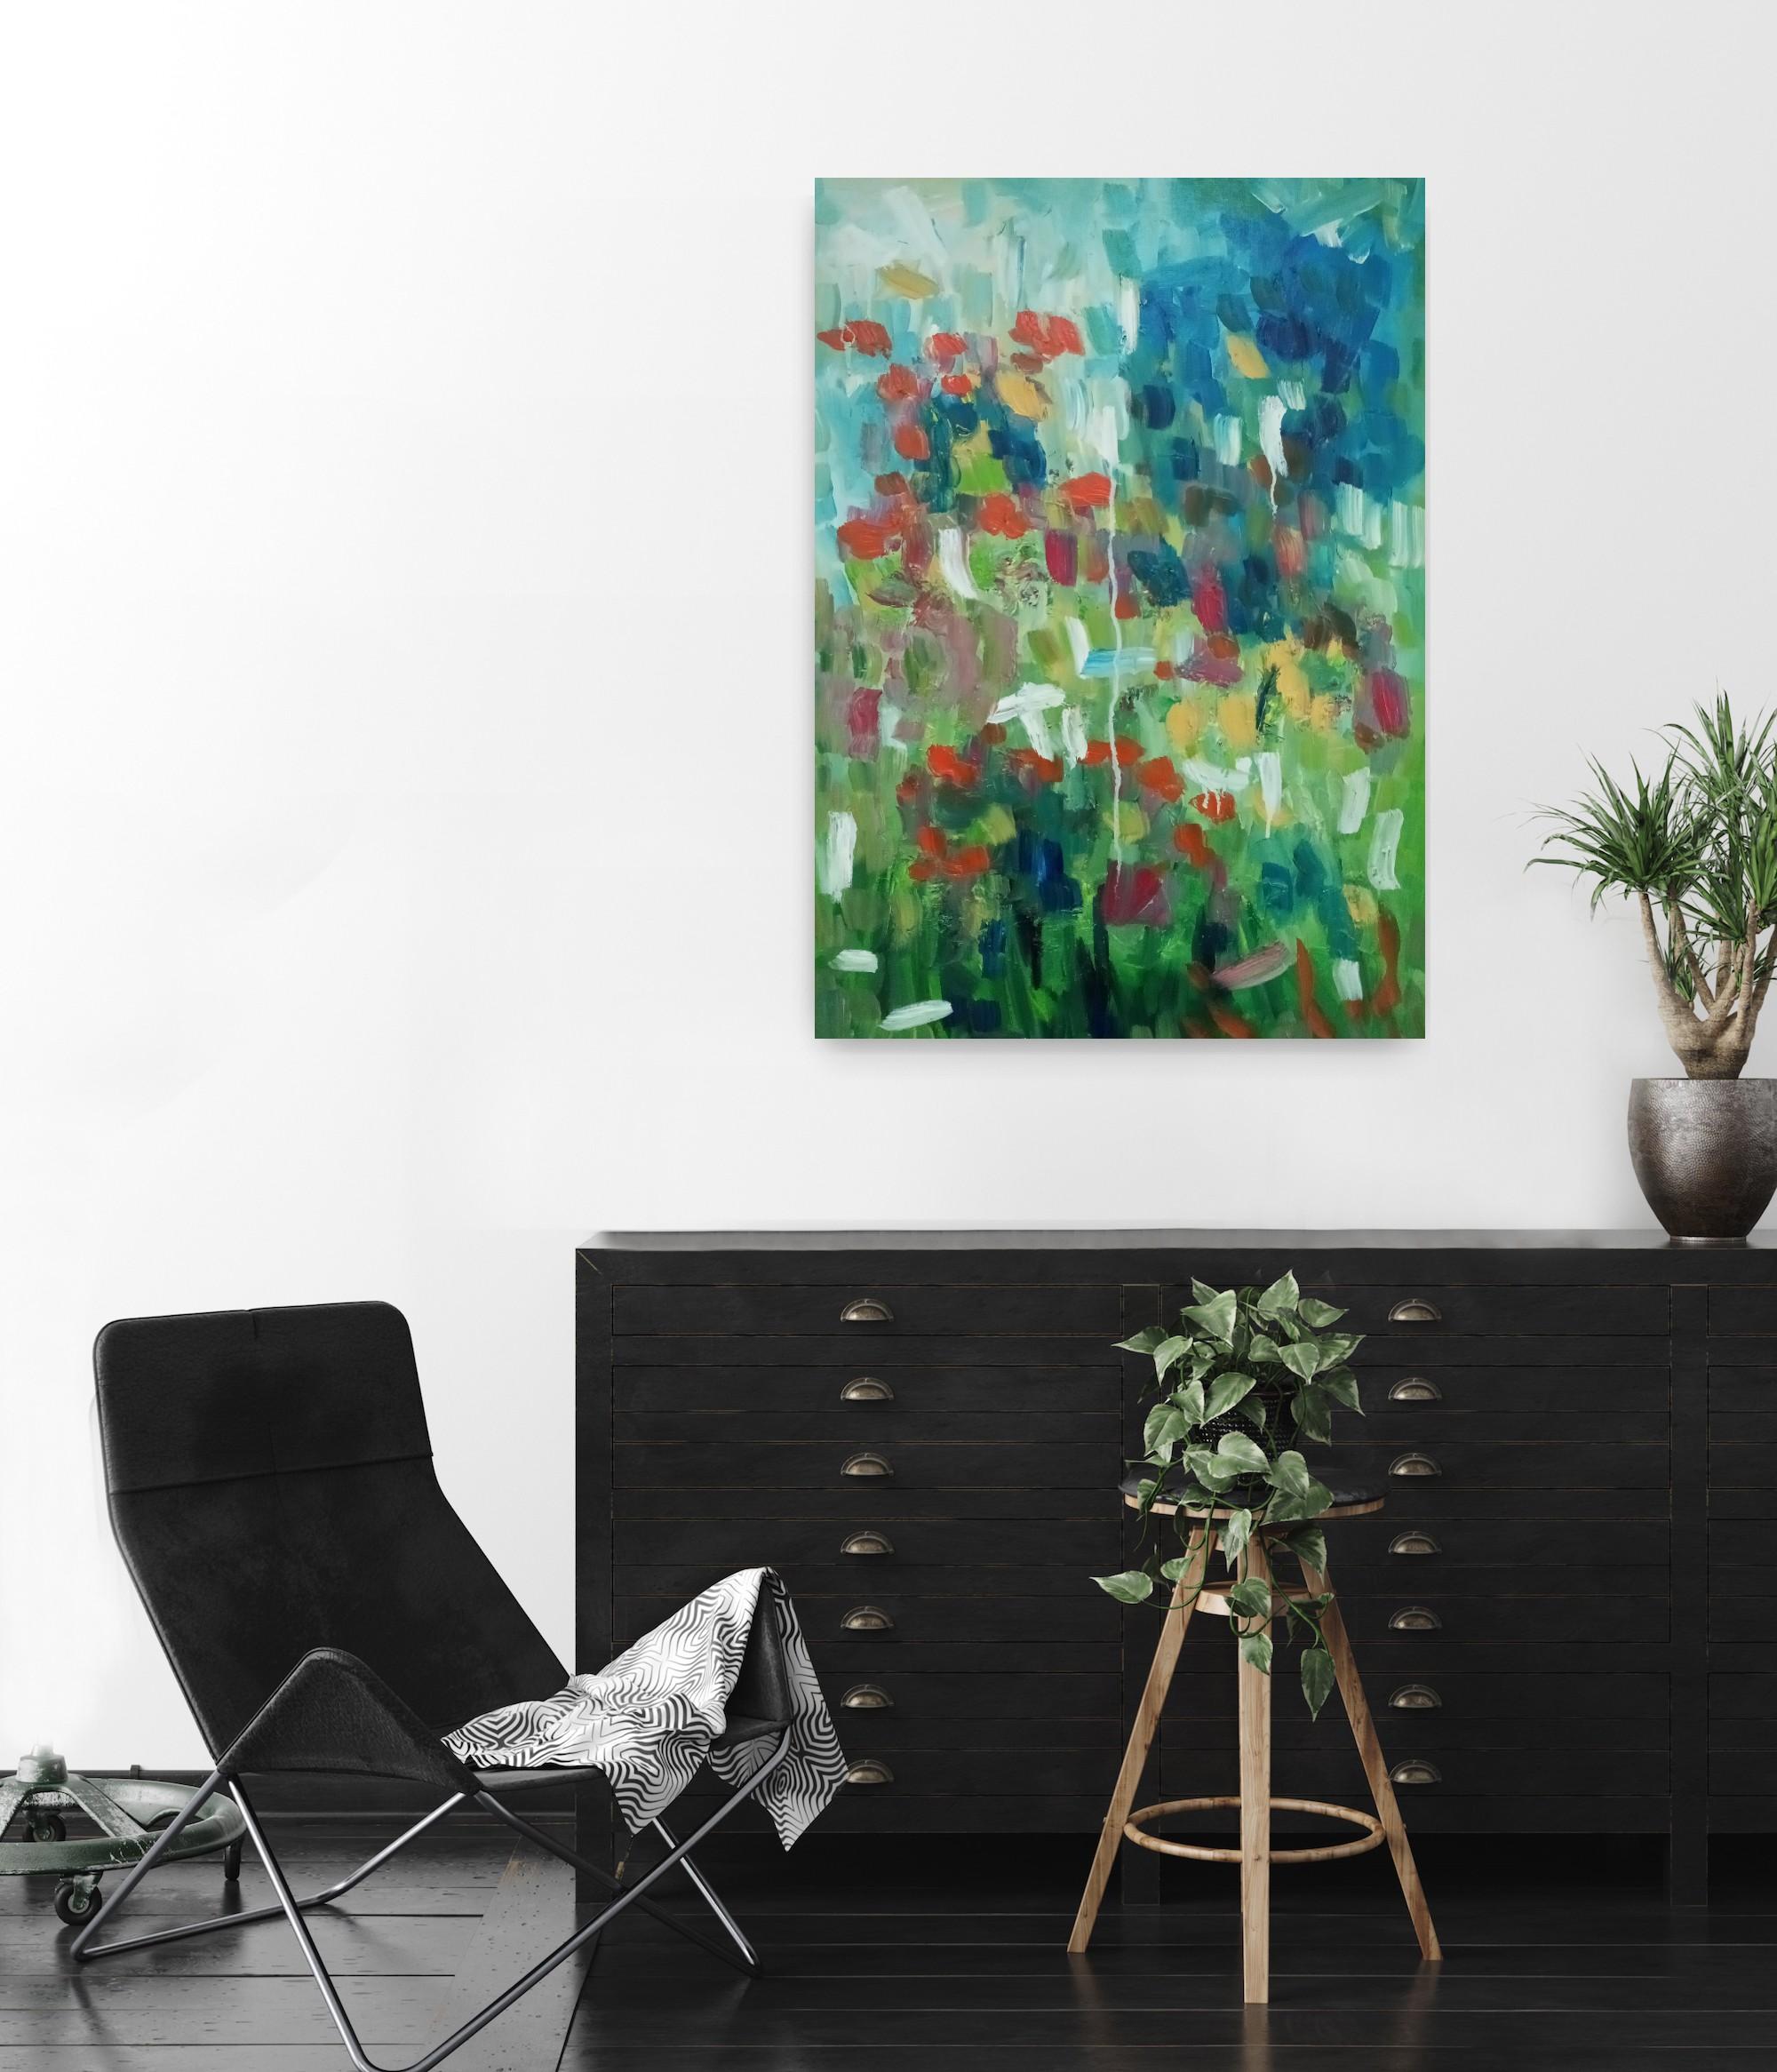 This oil painting makes part of my series dedicated to the scenes of a summer period.

This abstract vibrant floral painting called 